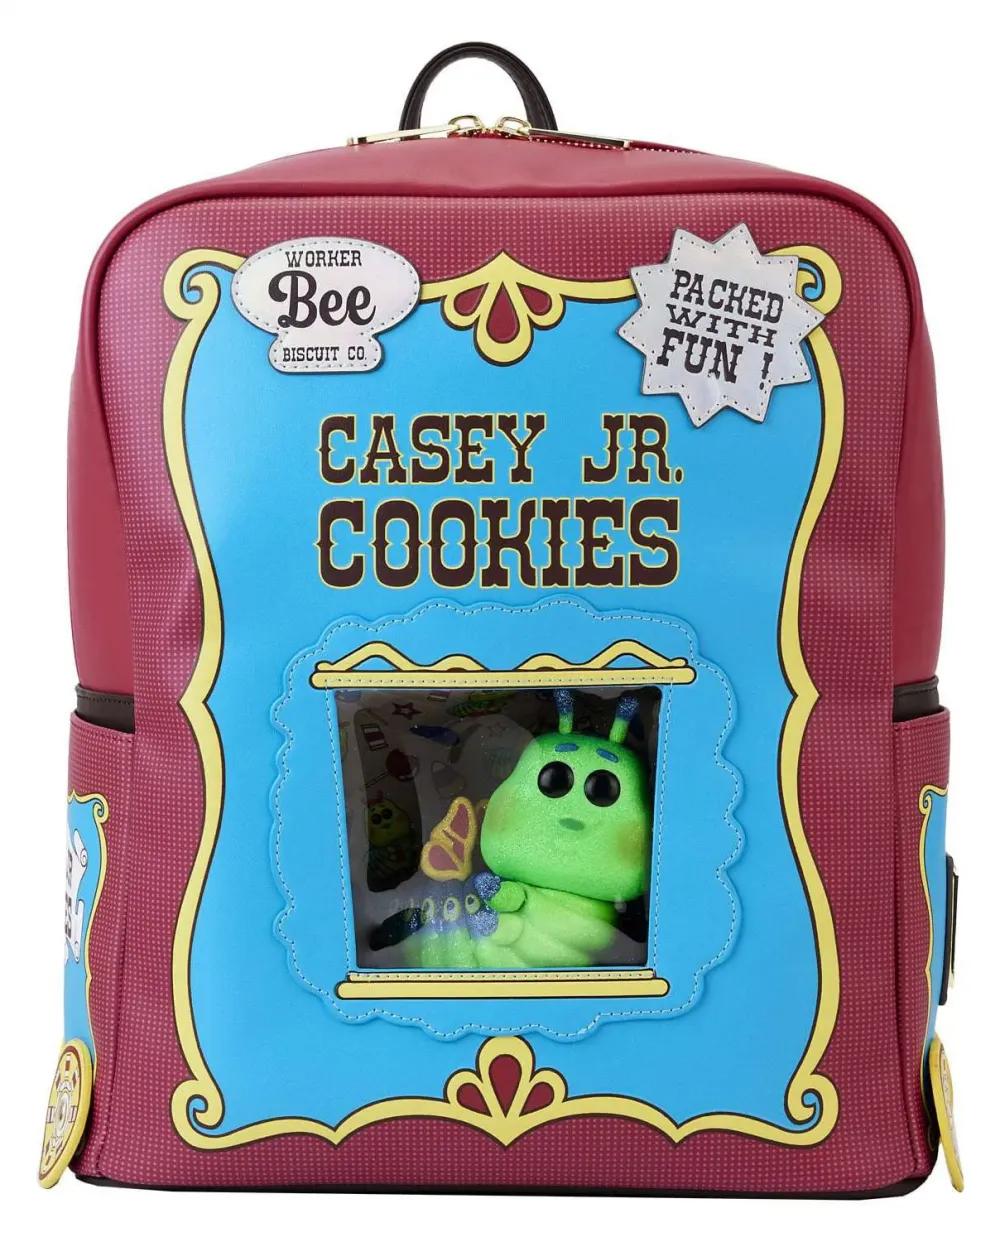 A Bug's Life Casey Jr Cookies with Heimlich Funko Pop Backpack Loungefly